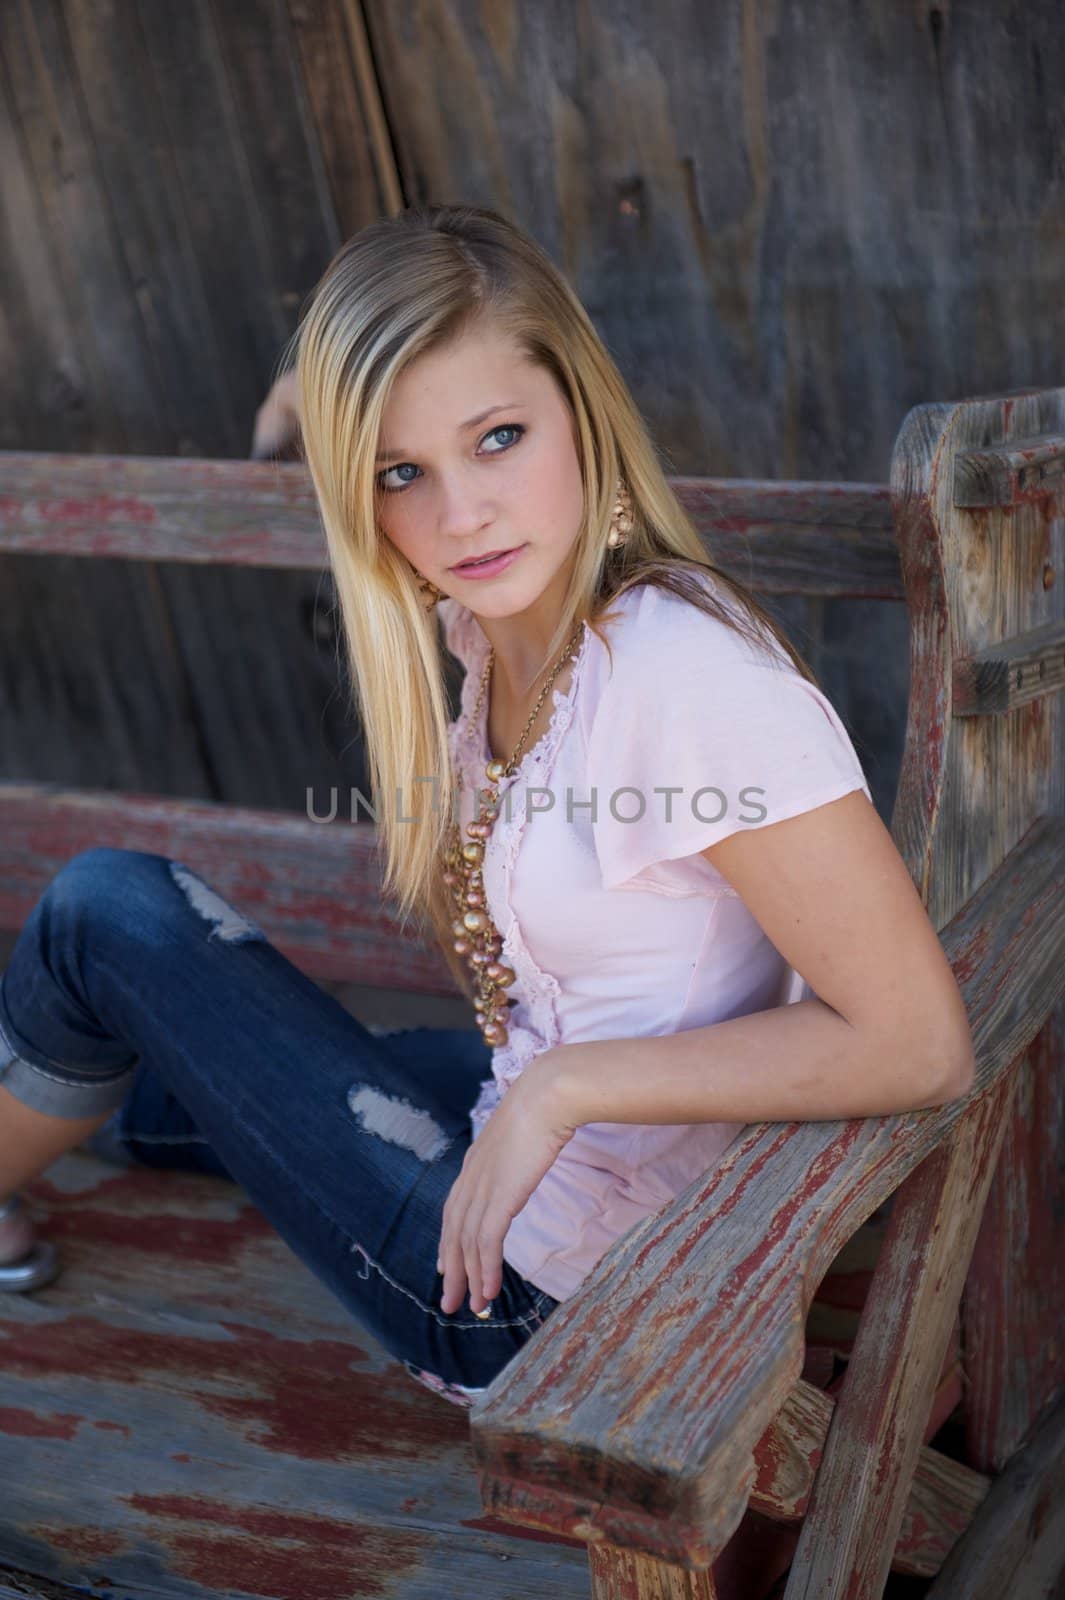 A beautiful blonde gilr sitting on an old wooden bench with torn jeans and a pink blouse